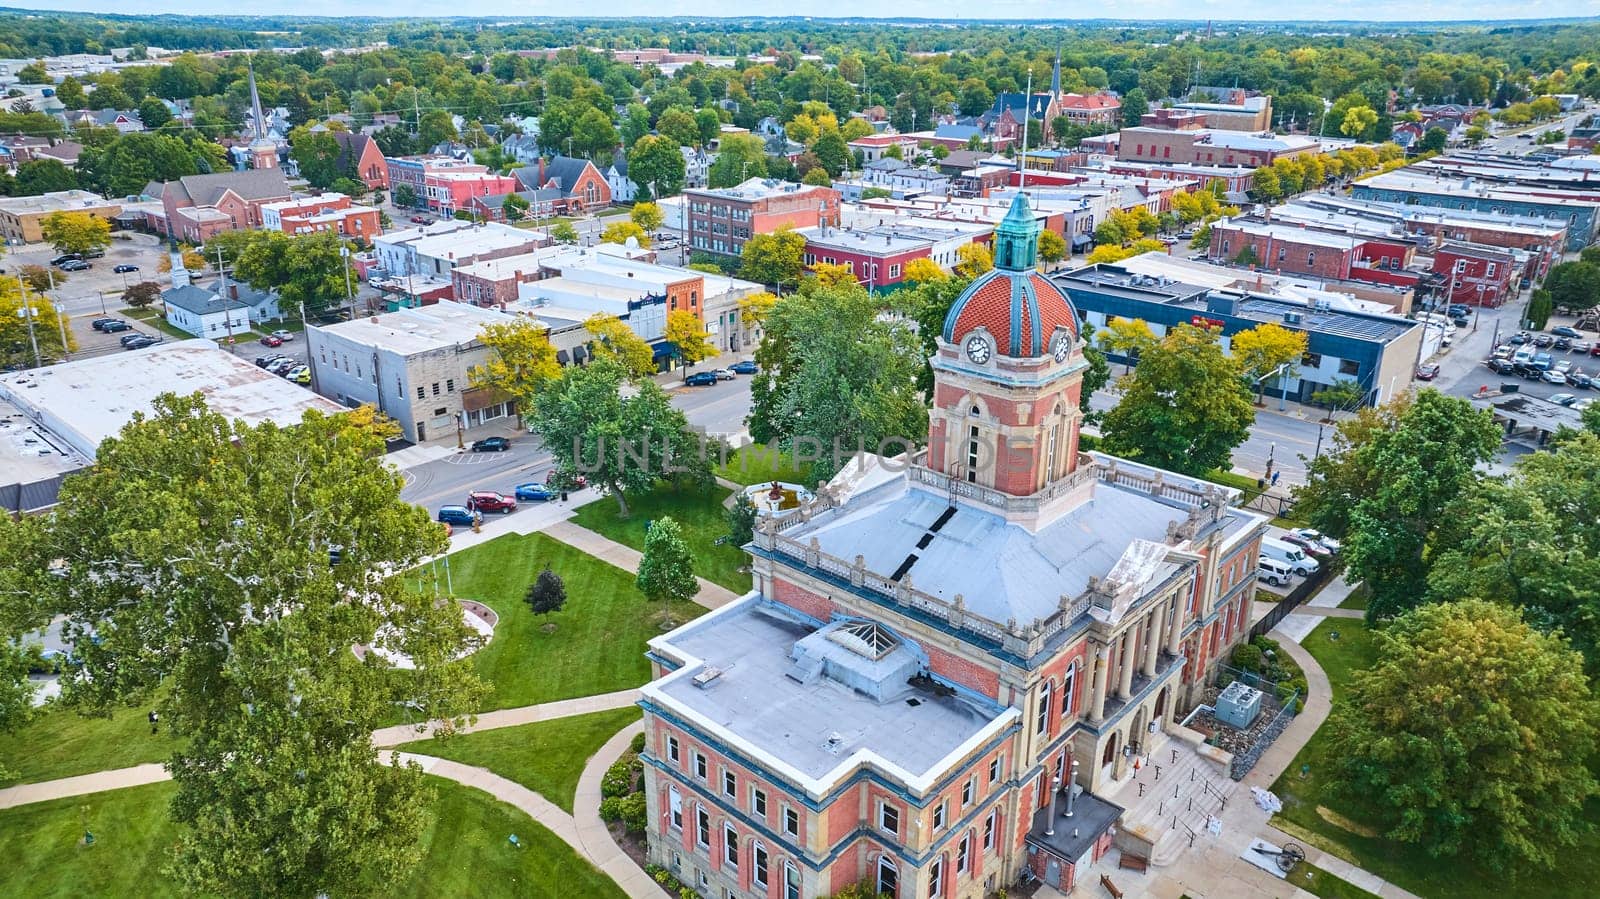 Aerial View of Historical Courthouse and Downtown in Small Town Goshen, Indiana